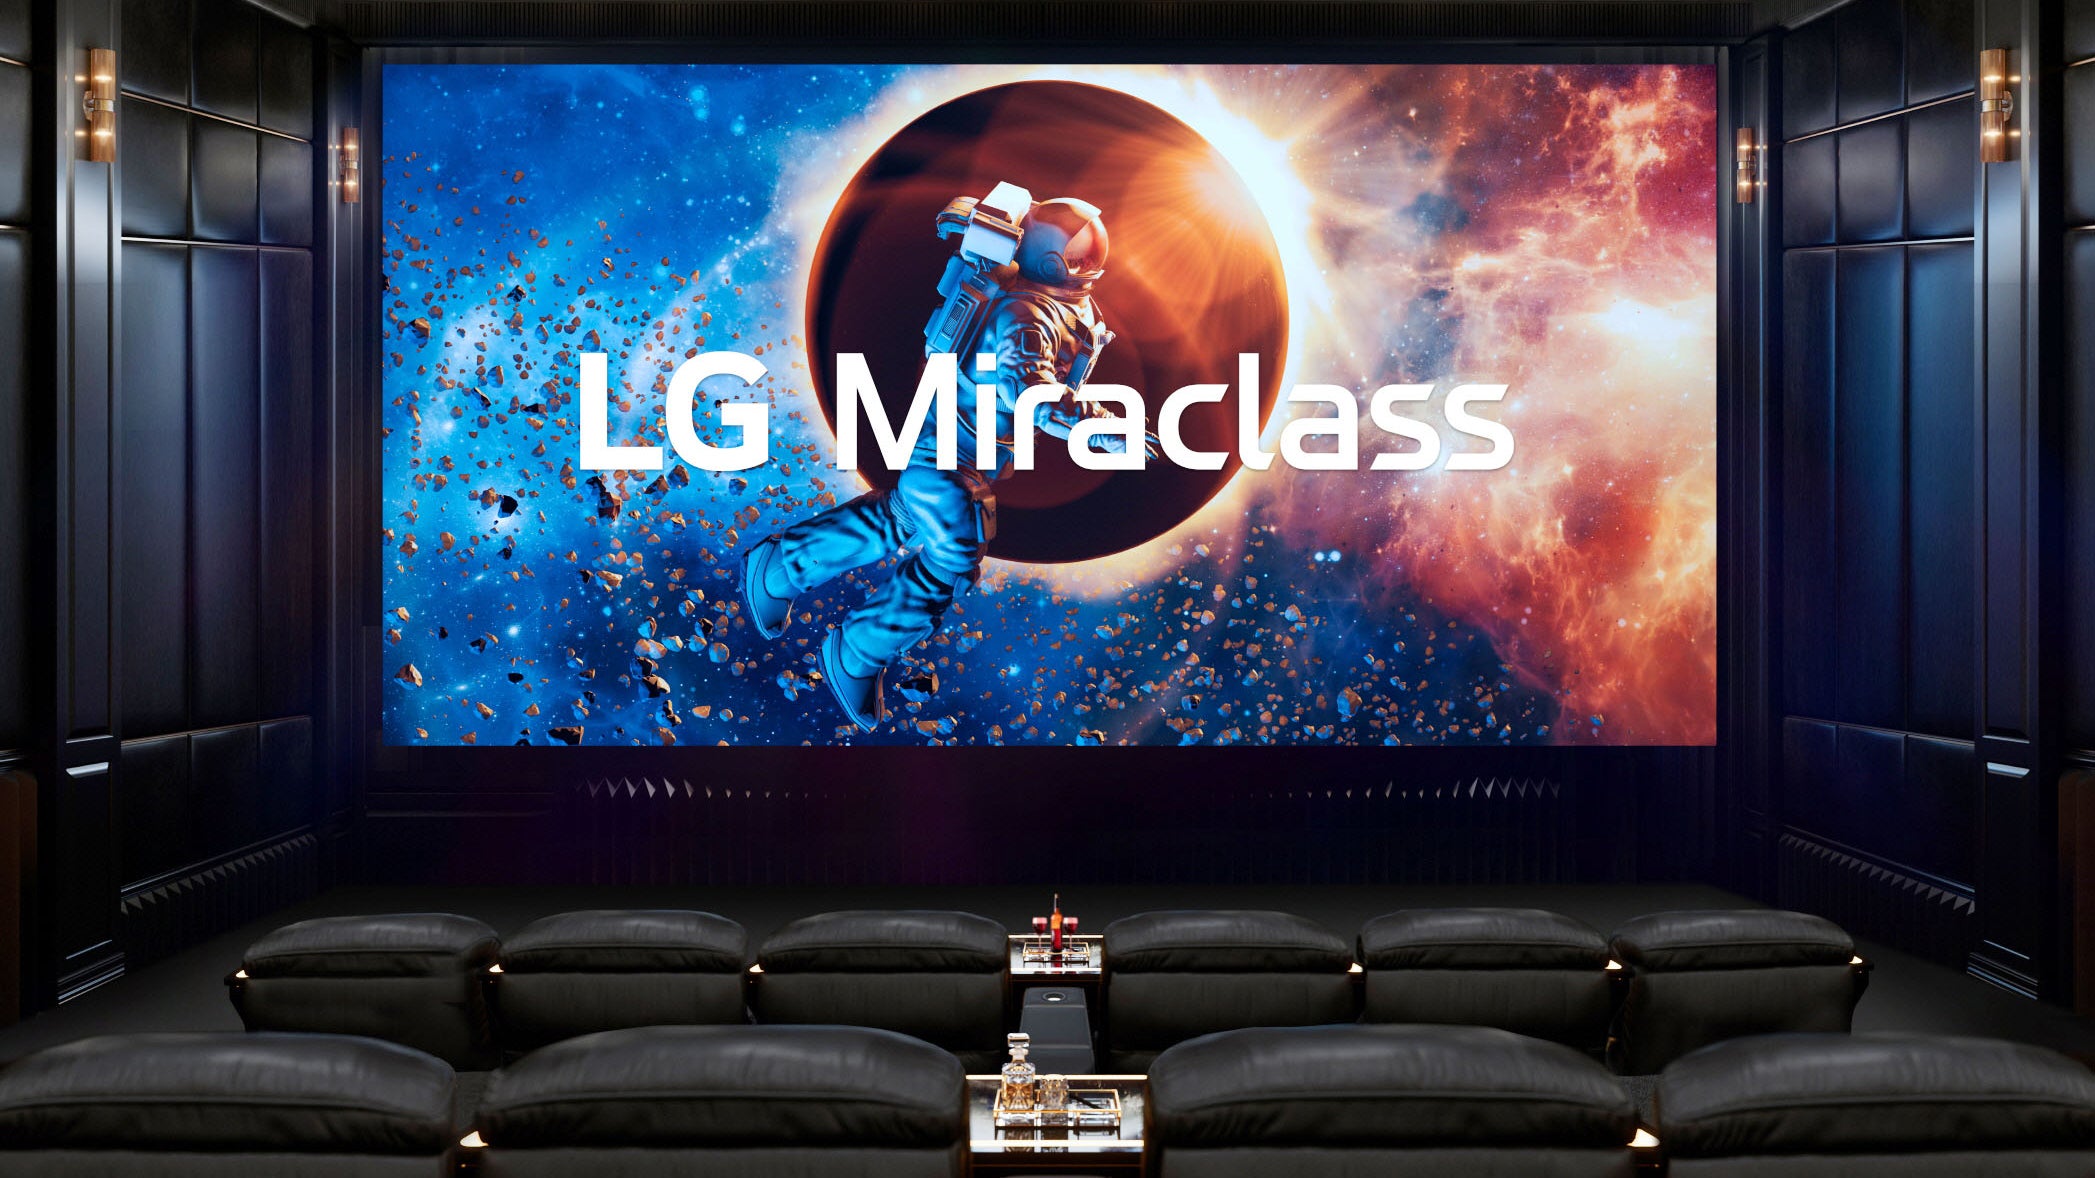 LG Is Now Making Giant LED Movie Screens to Replace Projectors in Smaller Theatres